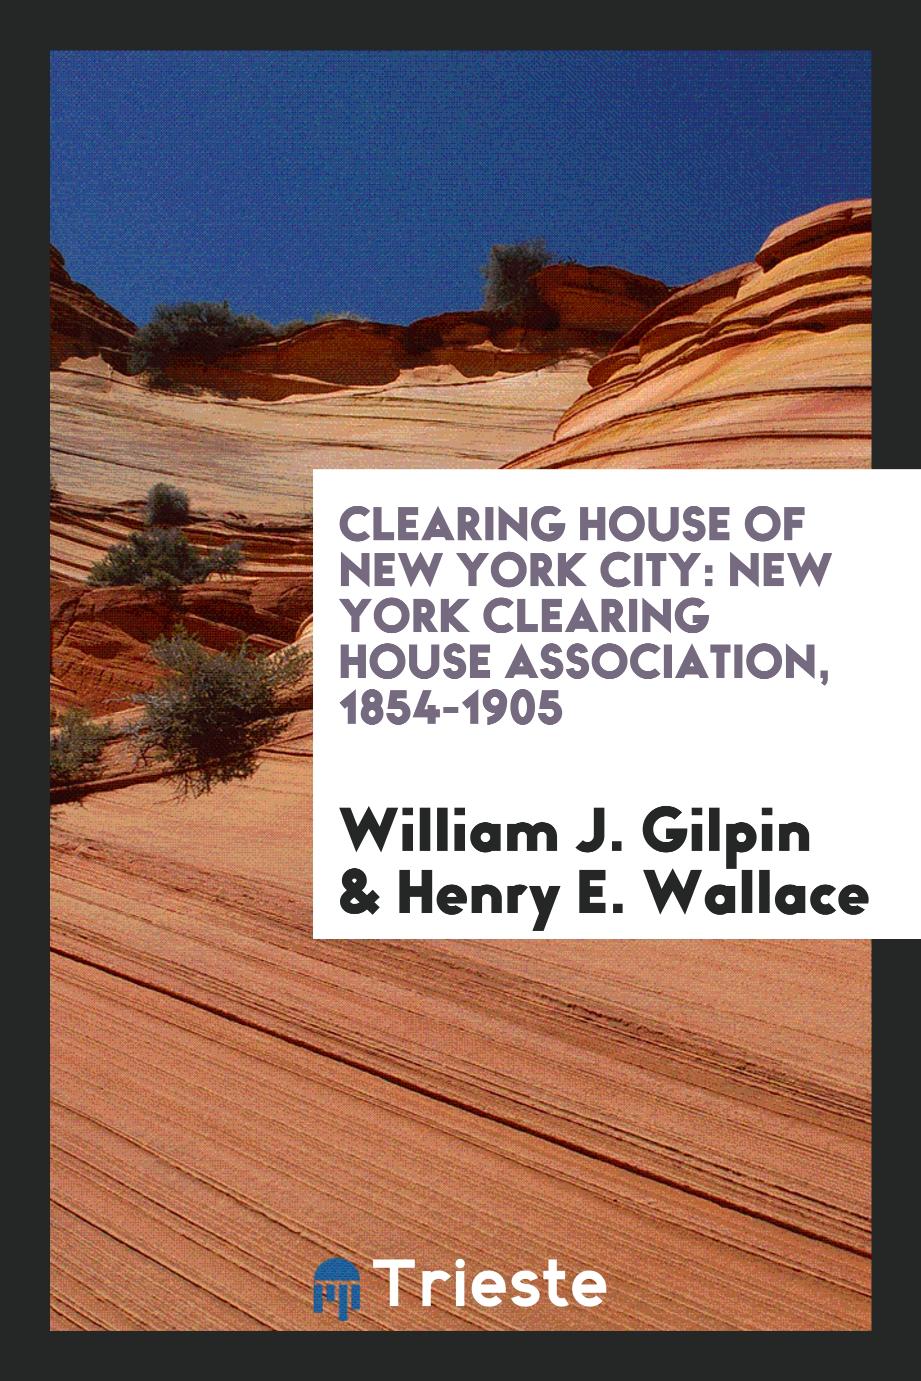 Clearing House of New York City: New York Clearing House Association, 1854-1905